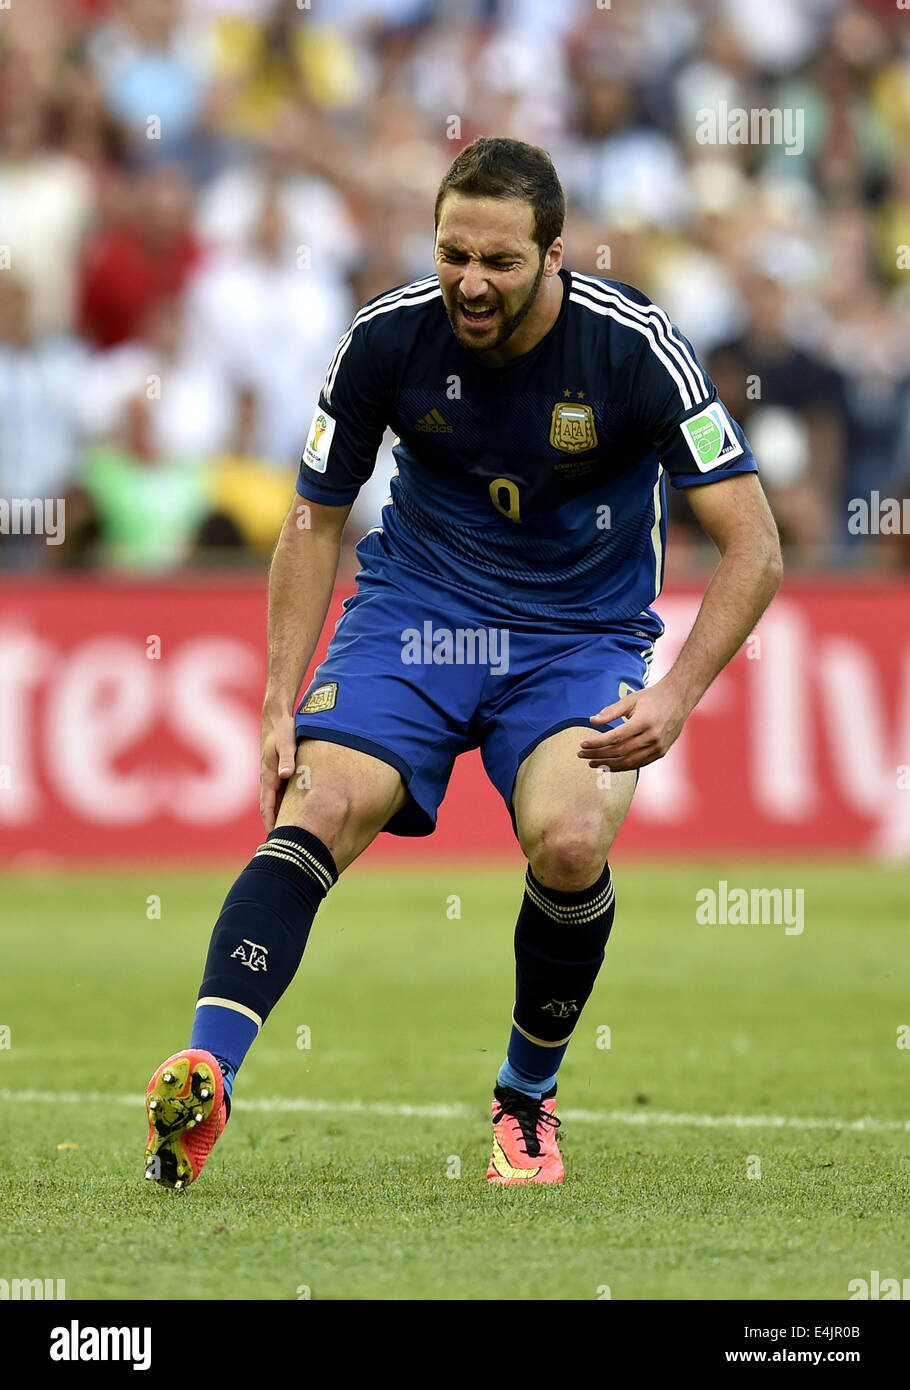 Rio De Janeiro, Brazil. 13th July, 2014. Argentina's Gonzalo Higuain reacts during the final match between Germany and Argentina of 2014 FIFA World Cup at the Estadio do Maracana Stadium in Rio de Janeiro, Brazil, on July 13, 2014. Credit:  Qi Heng/Xinhua/Alamy Live News Stock Photo